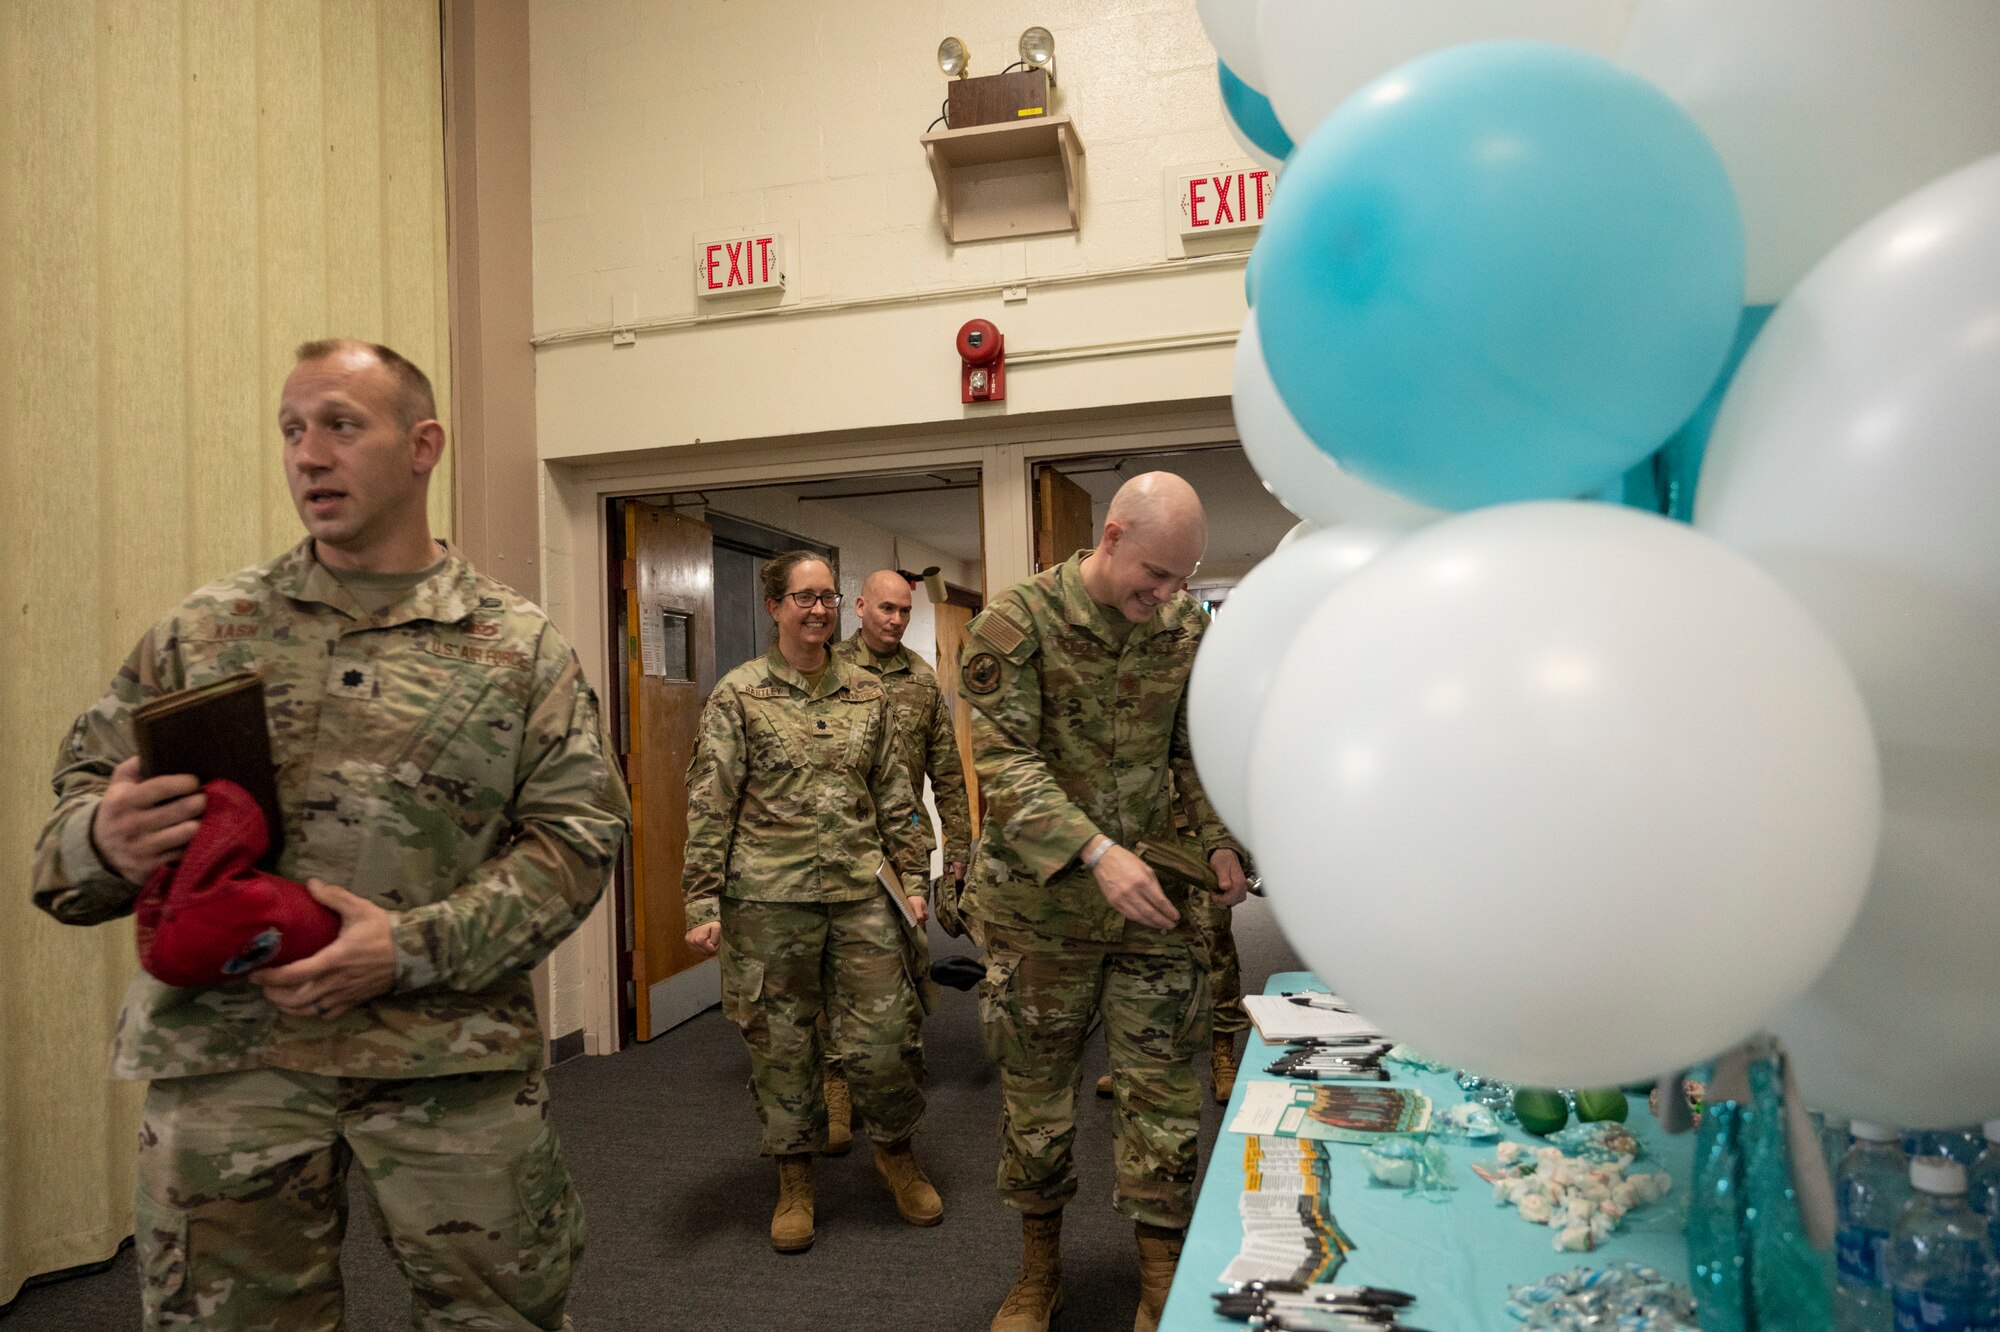 People in uniform sign in at a table with white and teal balloons.